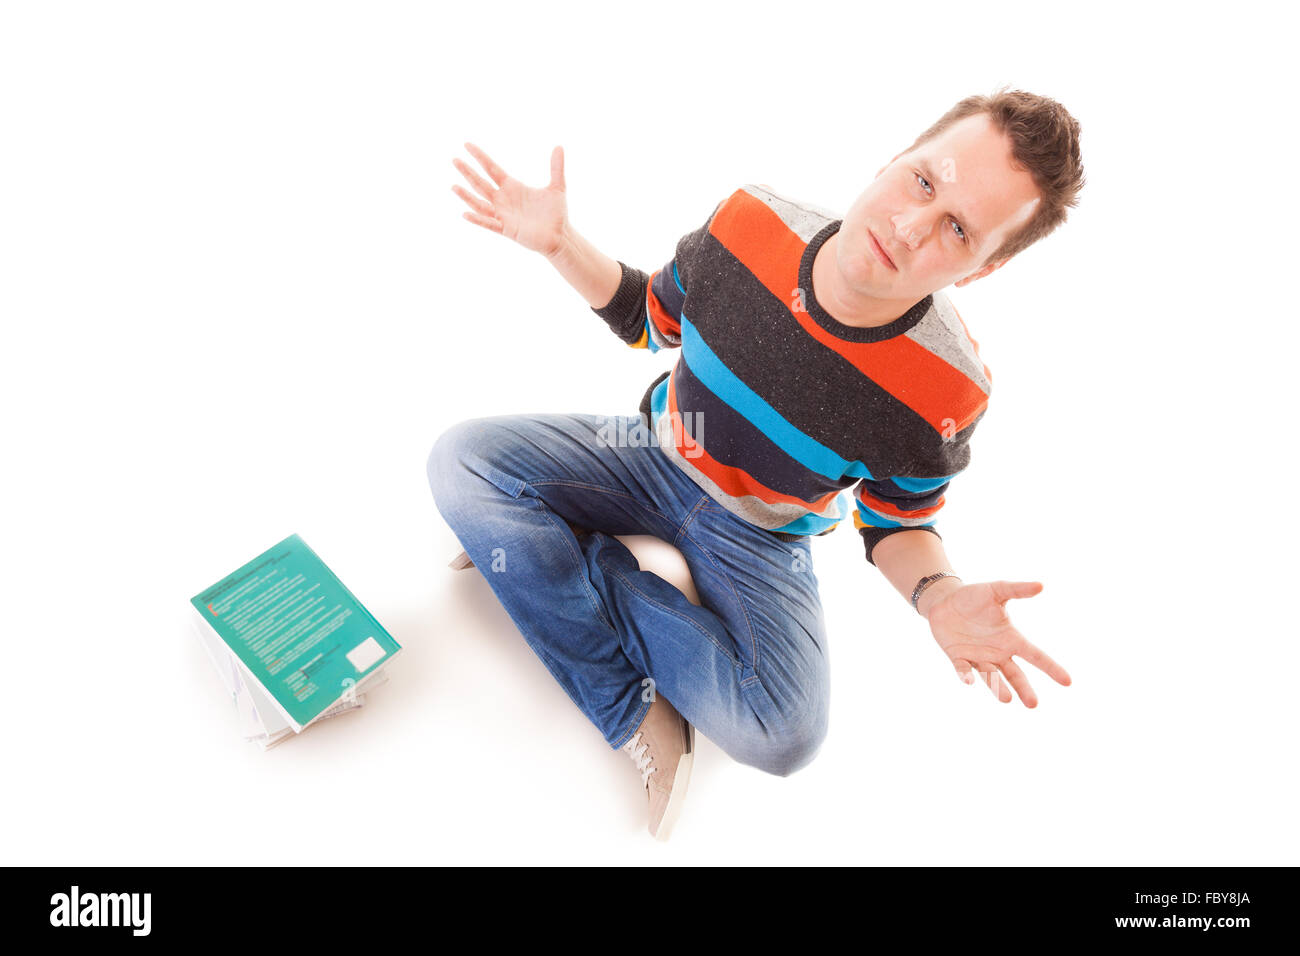 Exhausted tired college student with pile of books studying for exams isolated on white background Stock Photo